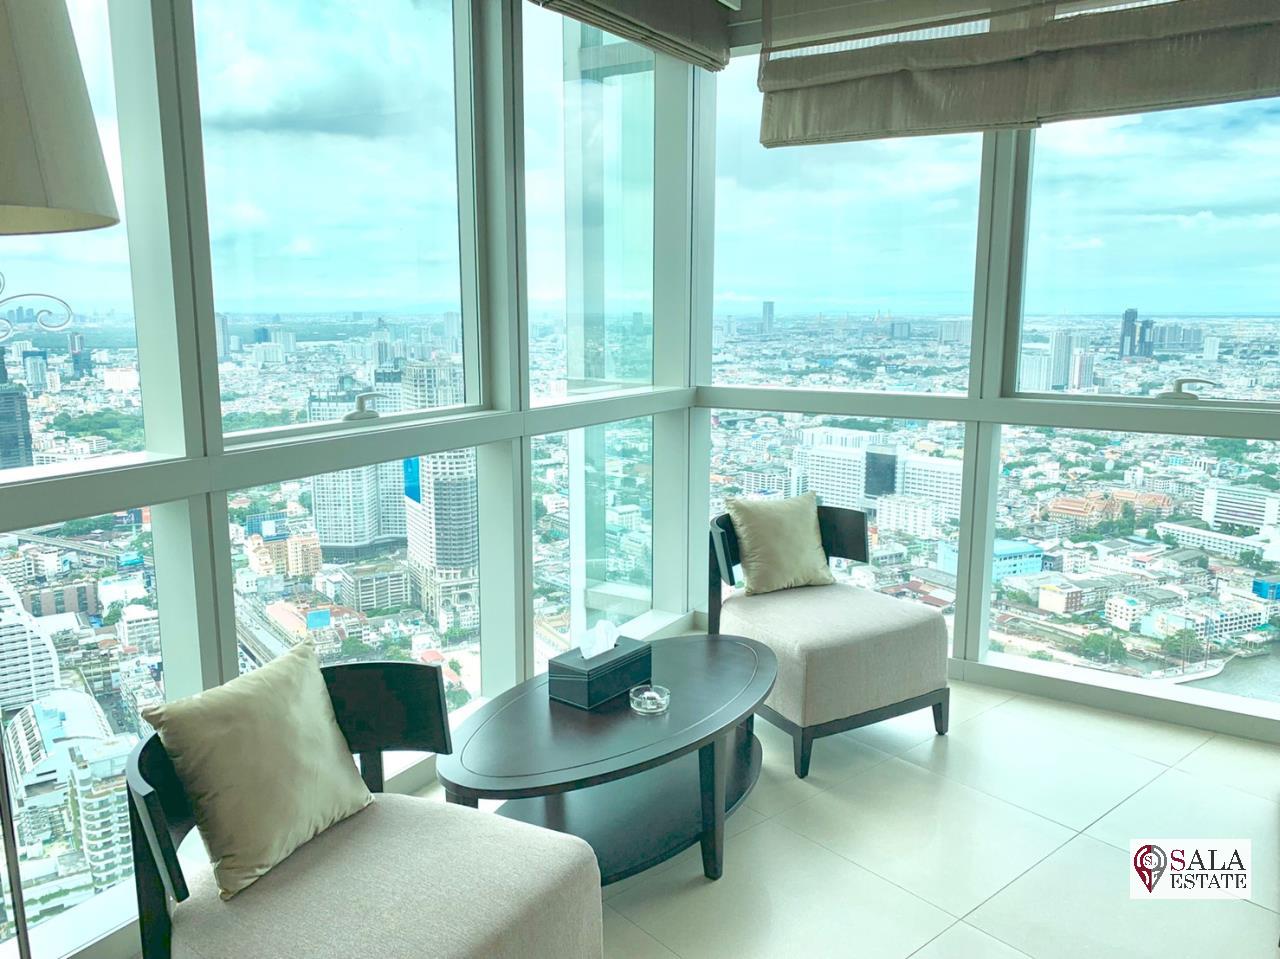 SALA ESTATE Agency's ( FOR SALE ) THE RIVER – RIVERSIDE , ICONSIAM ,232 SQM 2 BEDROOMS 3 BATHROOMS 2 LIVING ROOMS, FULLY FURNISHED,RIVER VIEW 10